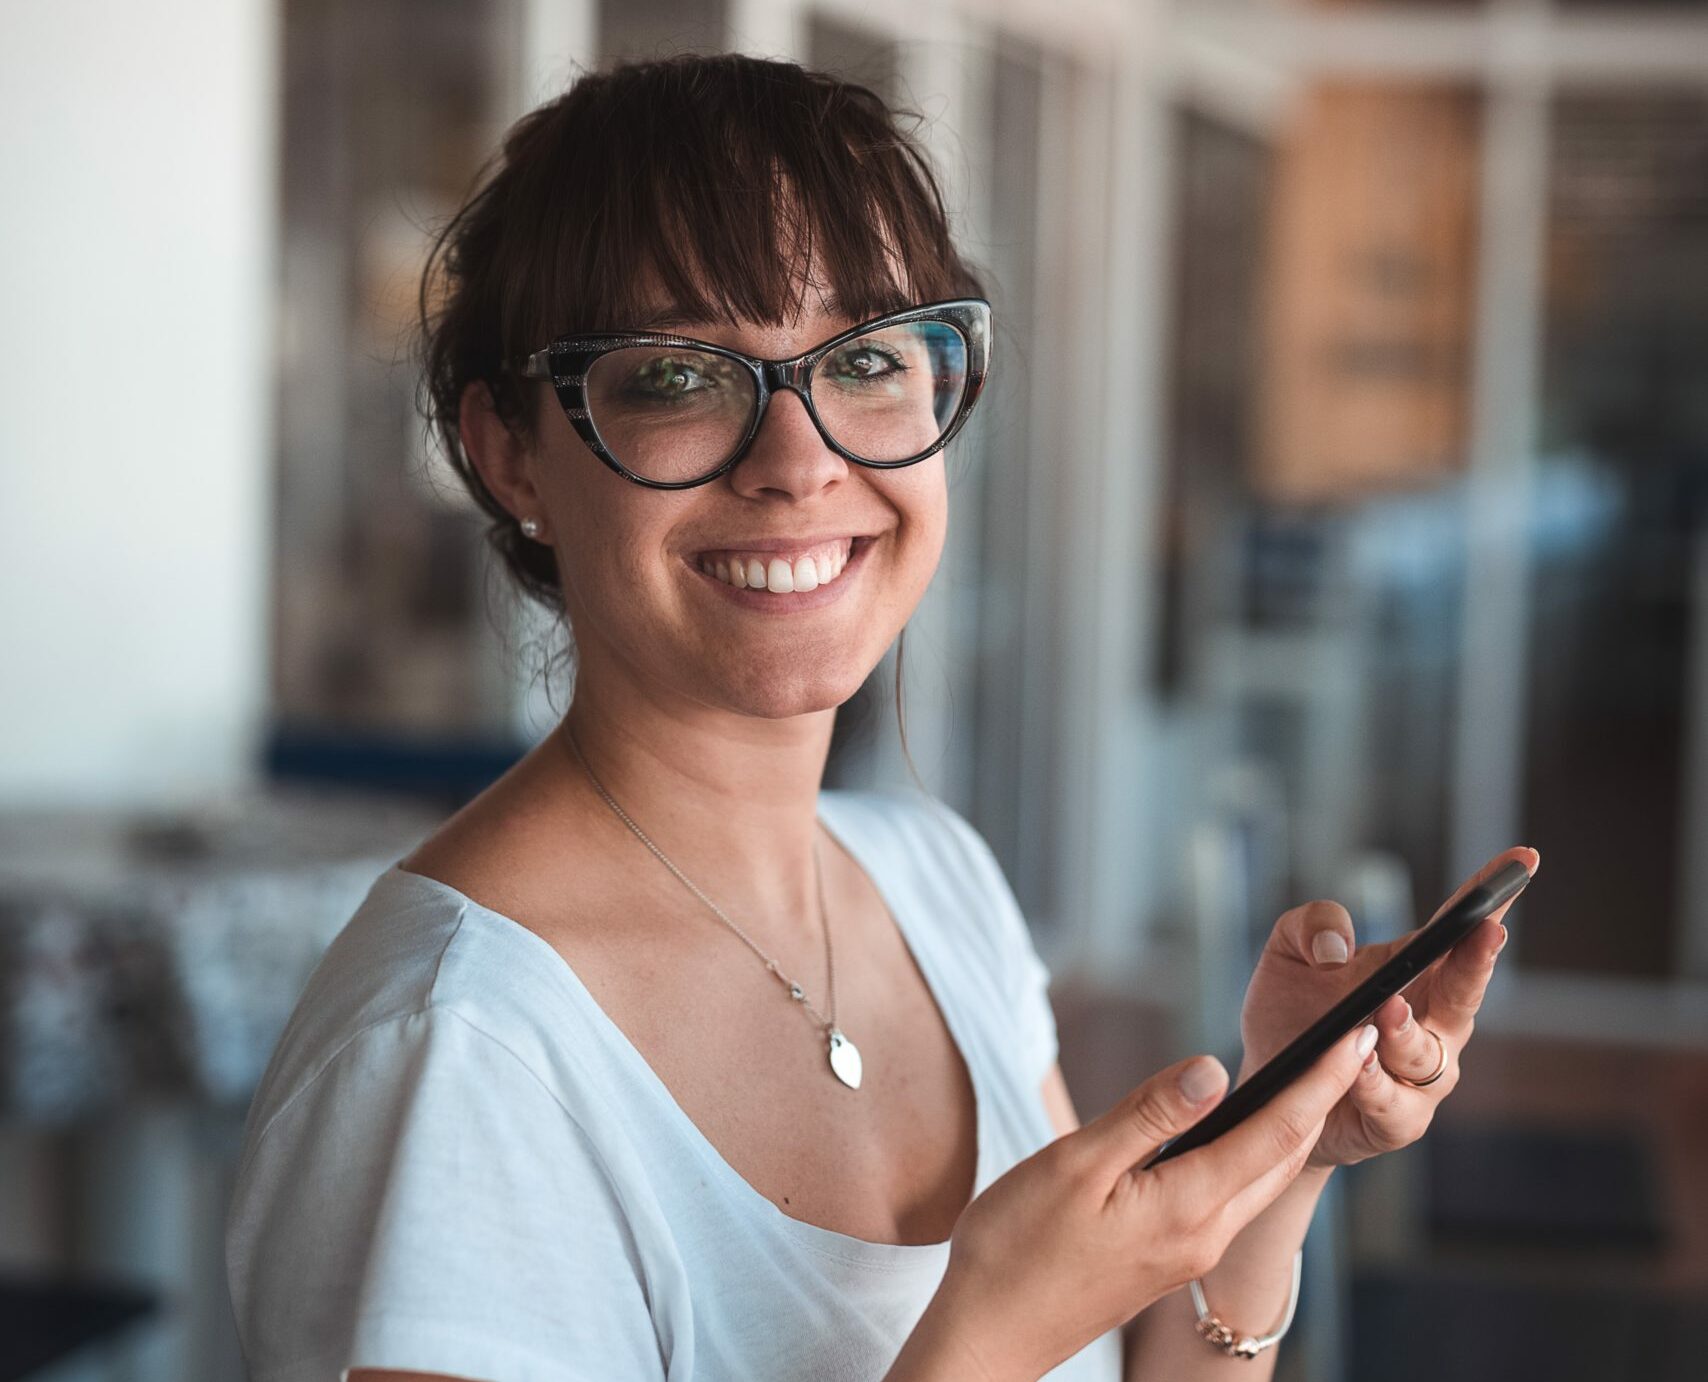 A smiling woman holding a smartphone.